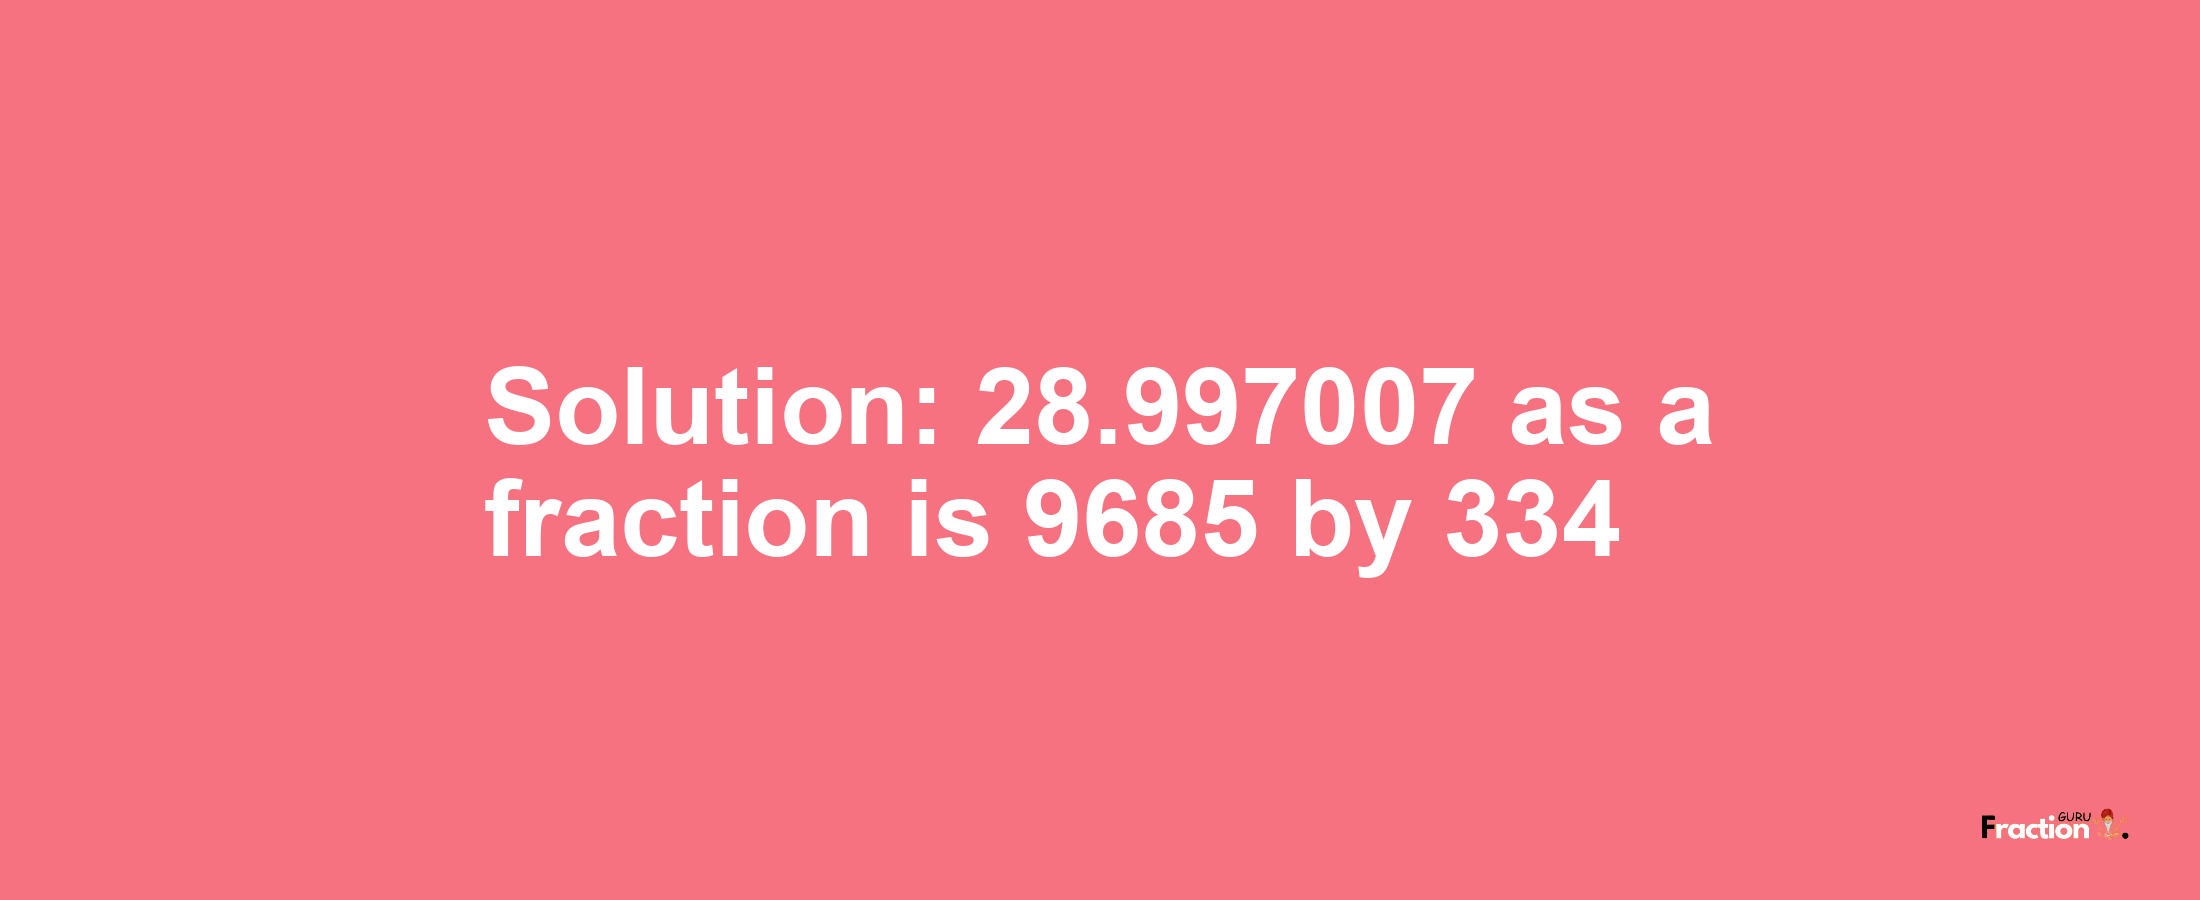 Solution:28.997007 as a fraction is 9685/334